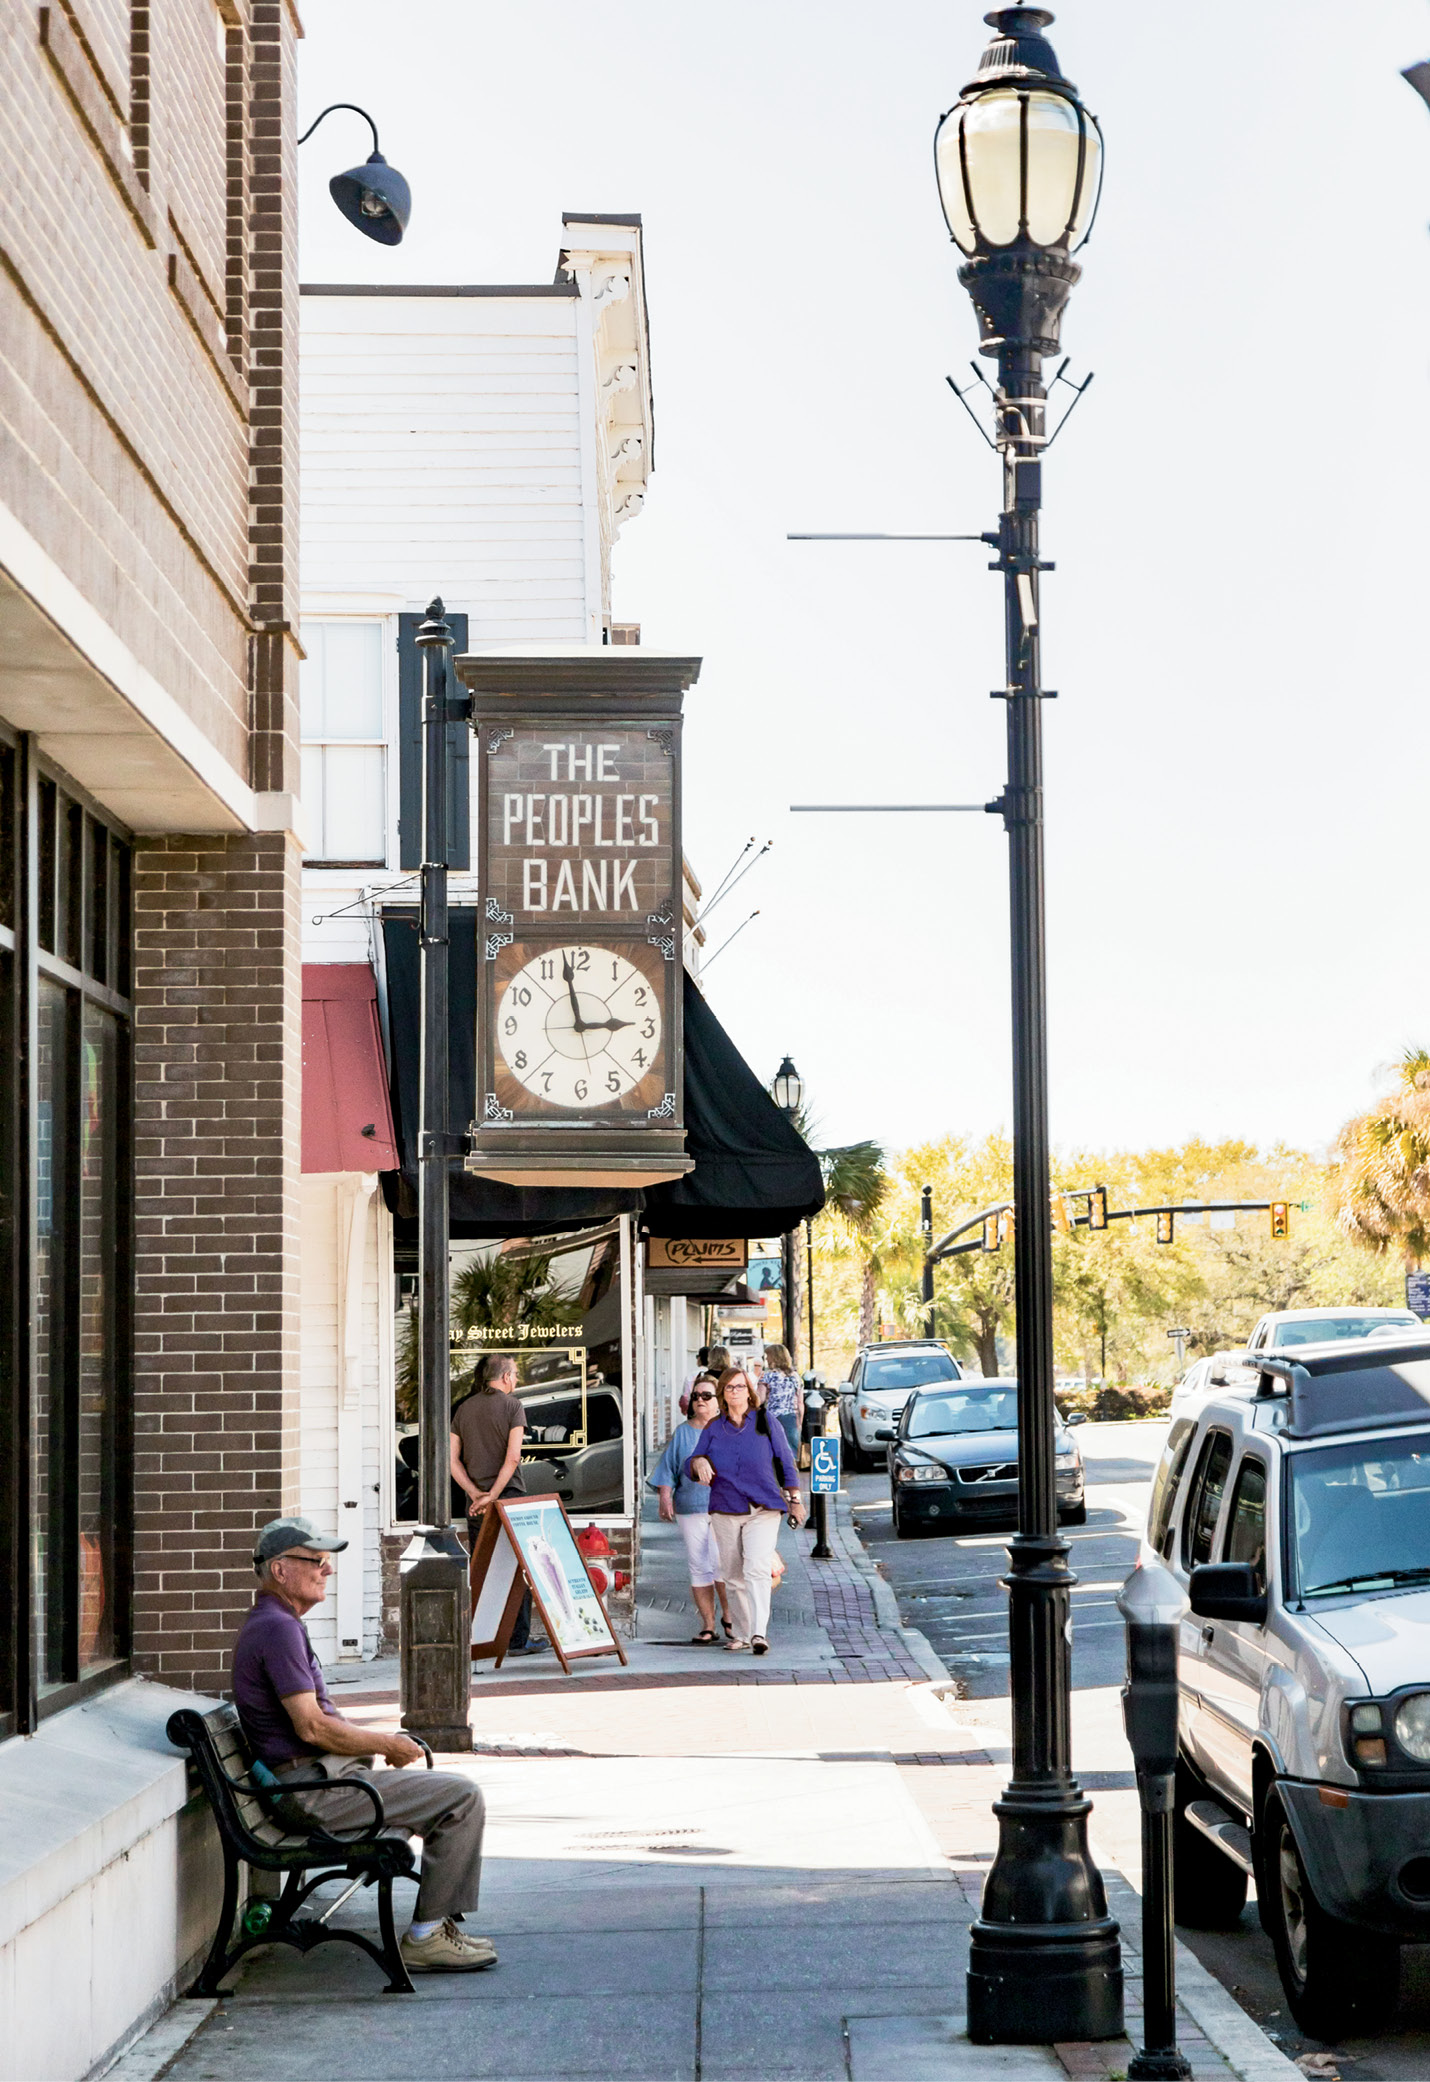 A view of Beaufort’s riverfront downtown and Bay Street lined with retail shops and restaurants